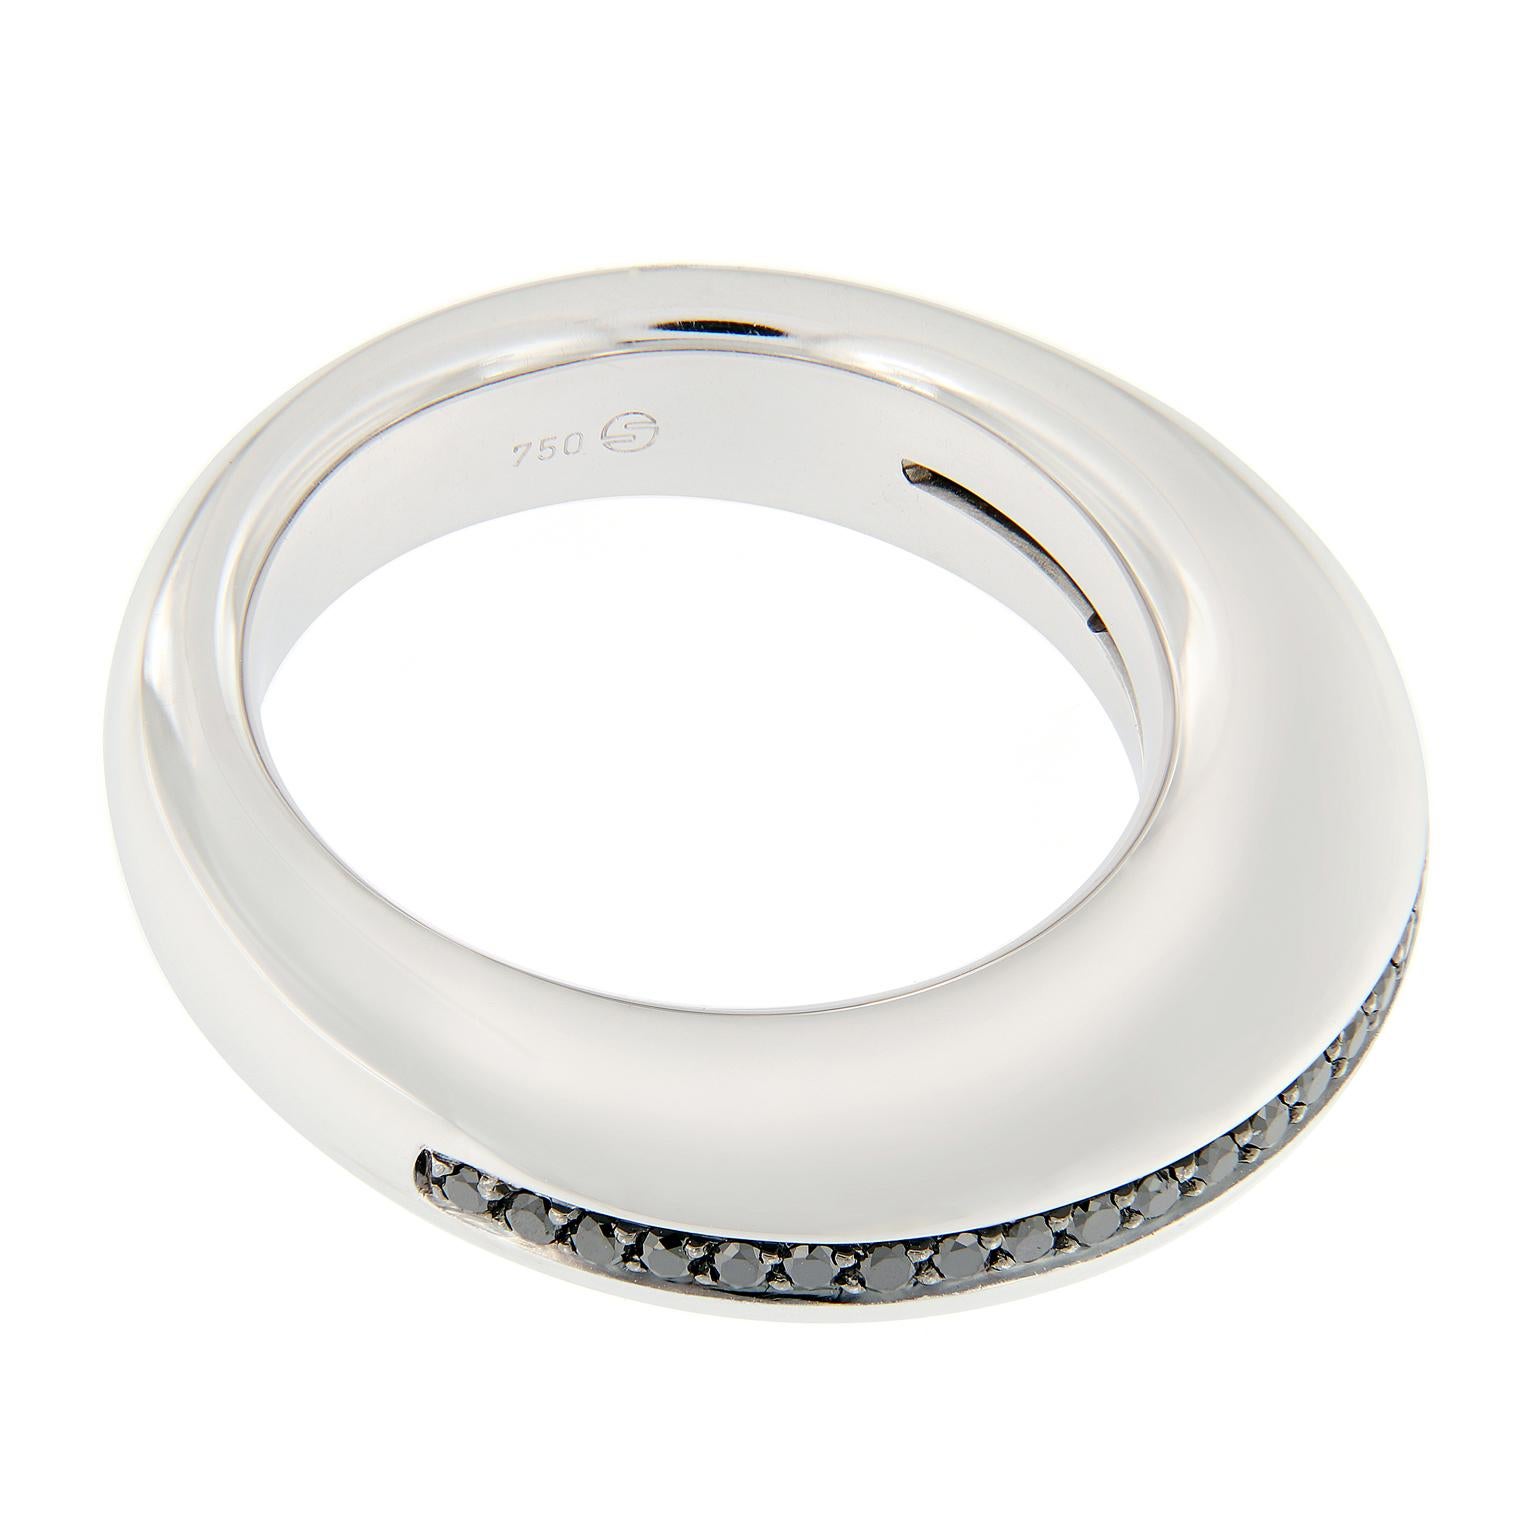 This comfort fit 18k white gold band features bead set black diamonds that go half way around the ring set in  
Ring size 6.5 x. Weighs 11.7 grams.
Marked Scheffel.

Diamonds 0.25 cttw
